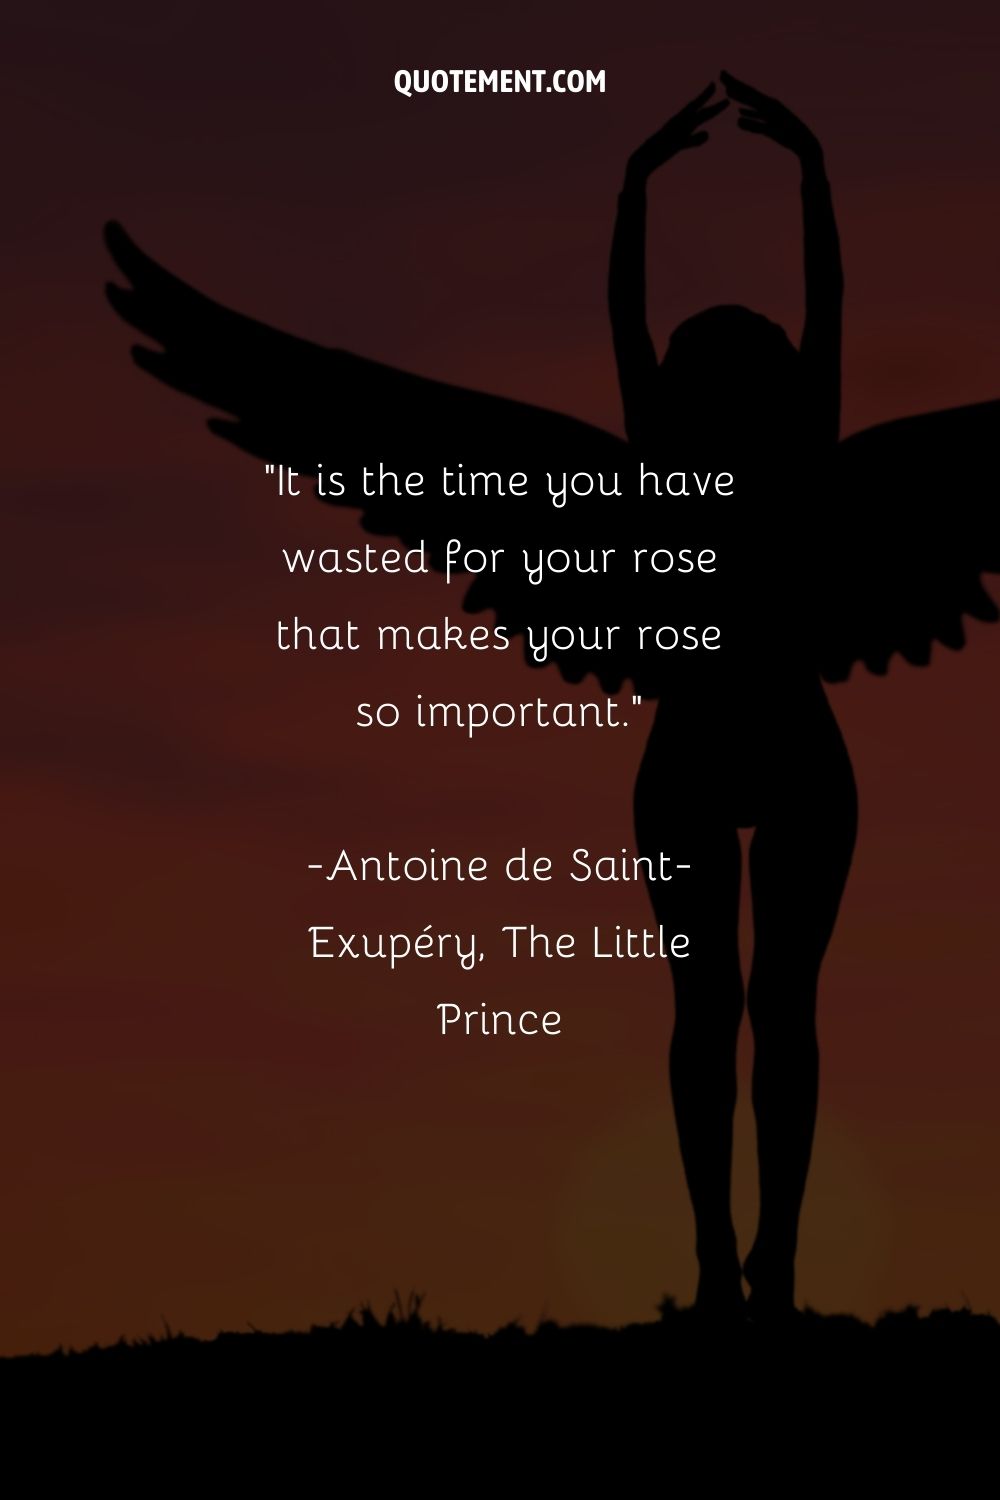 It is the time you have wasted for your rose that makes your rose so important